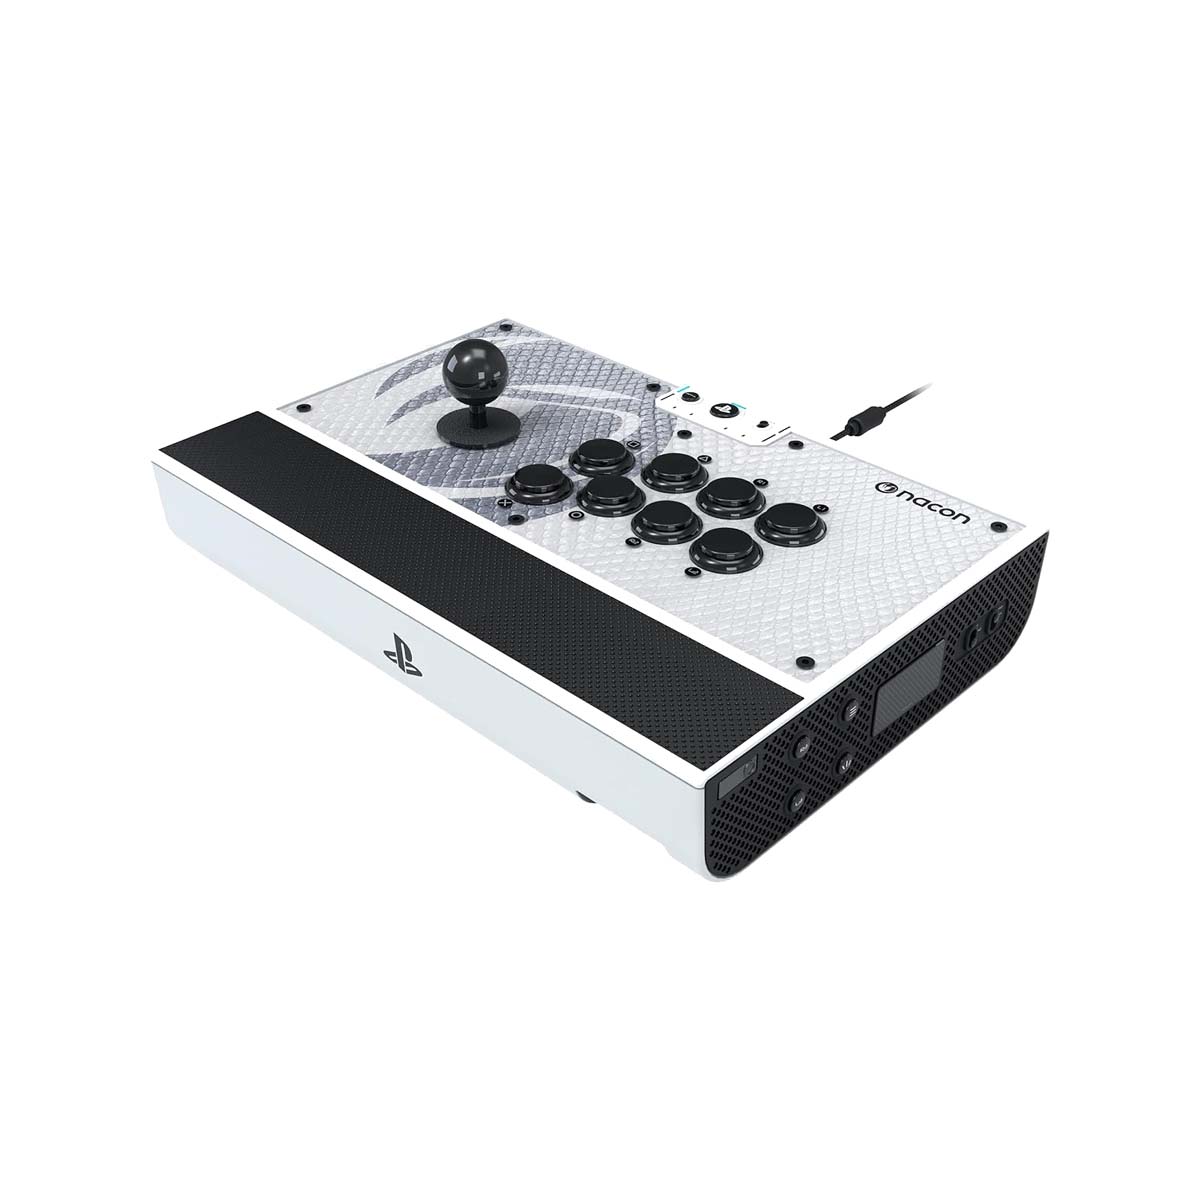 Nacon Daija Arcade Fight Stick Officially Licensed for PlayStation PS5, PS4 and Windows 10 | 11 PC